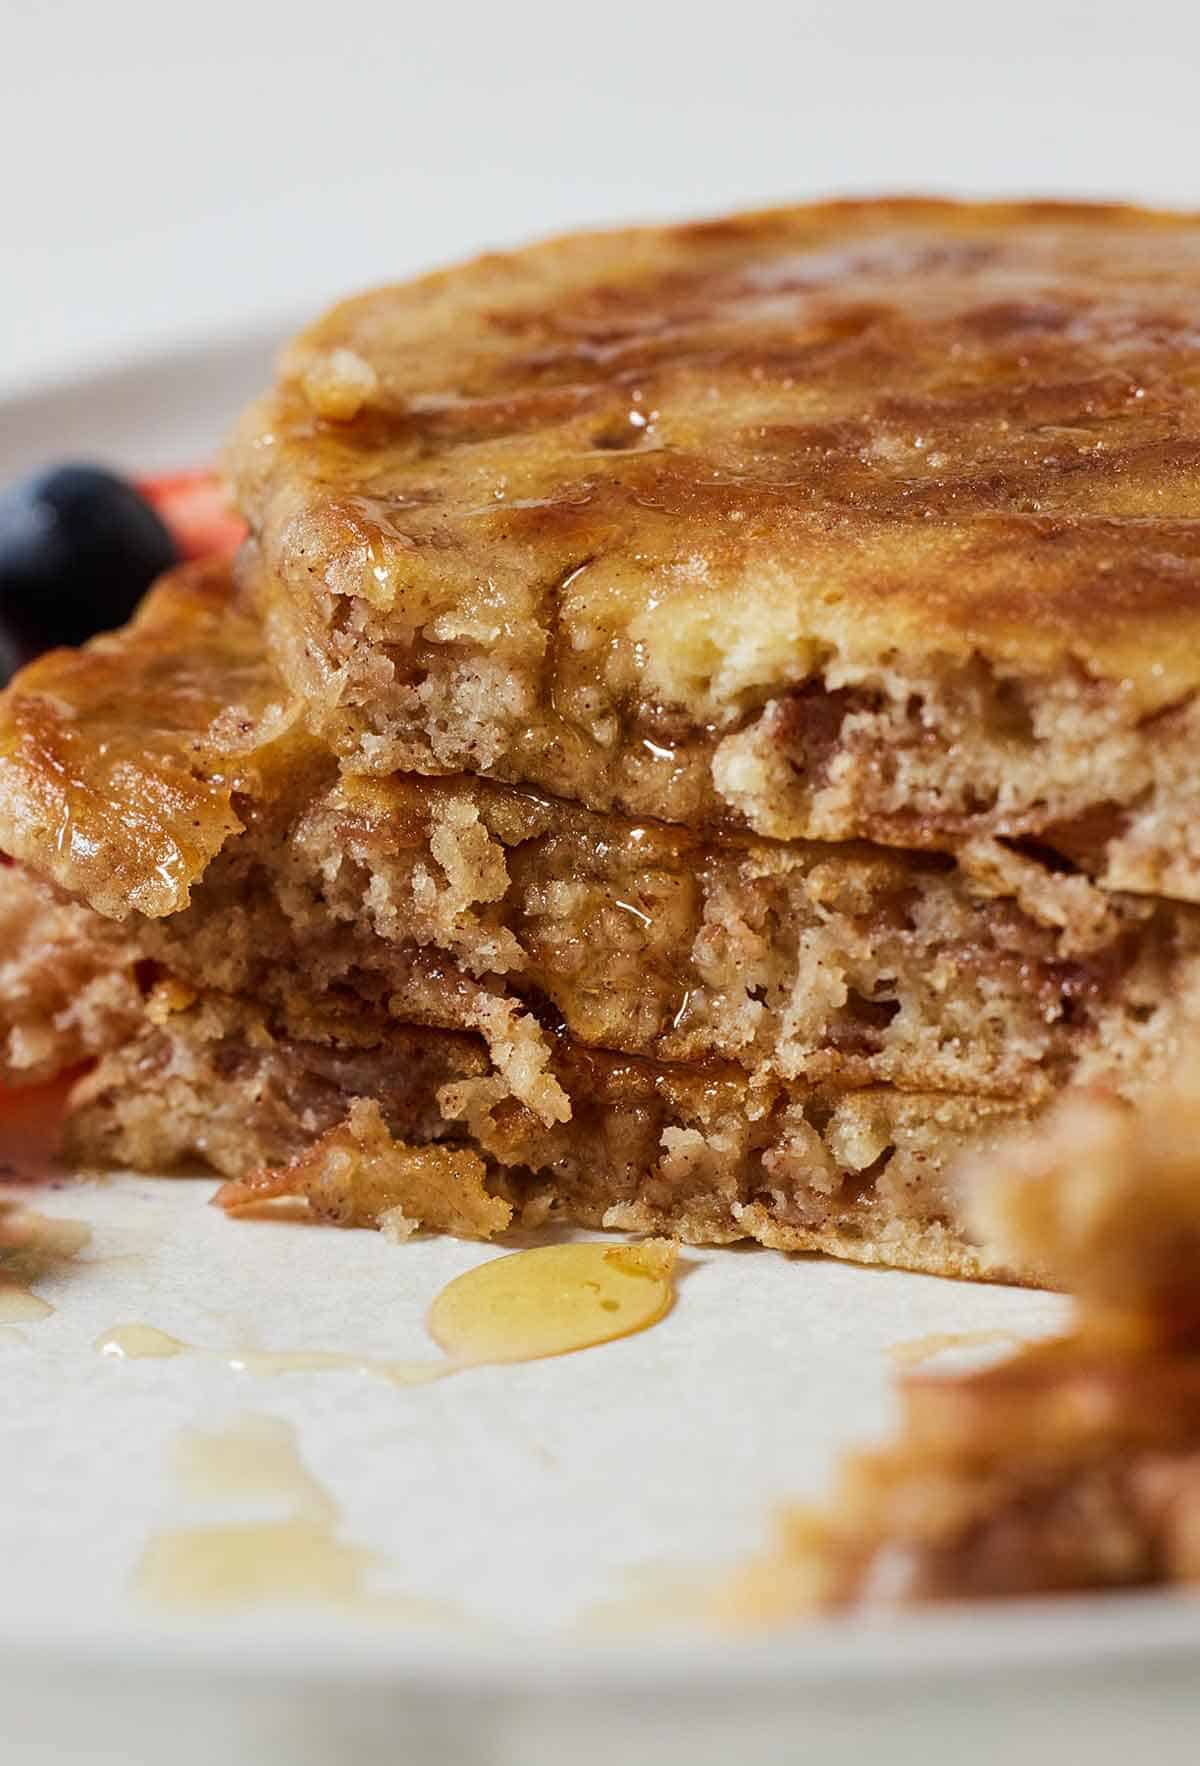 Close view of three apple pancakes stacked with a portion cut, showing the inside.